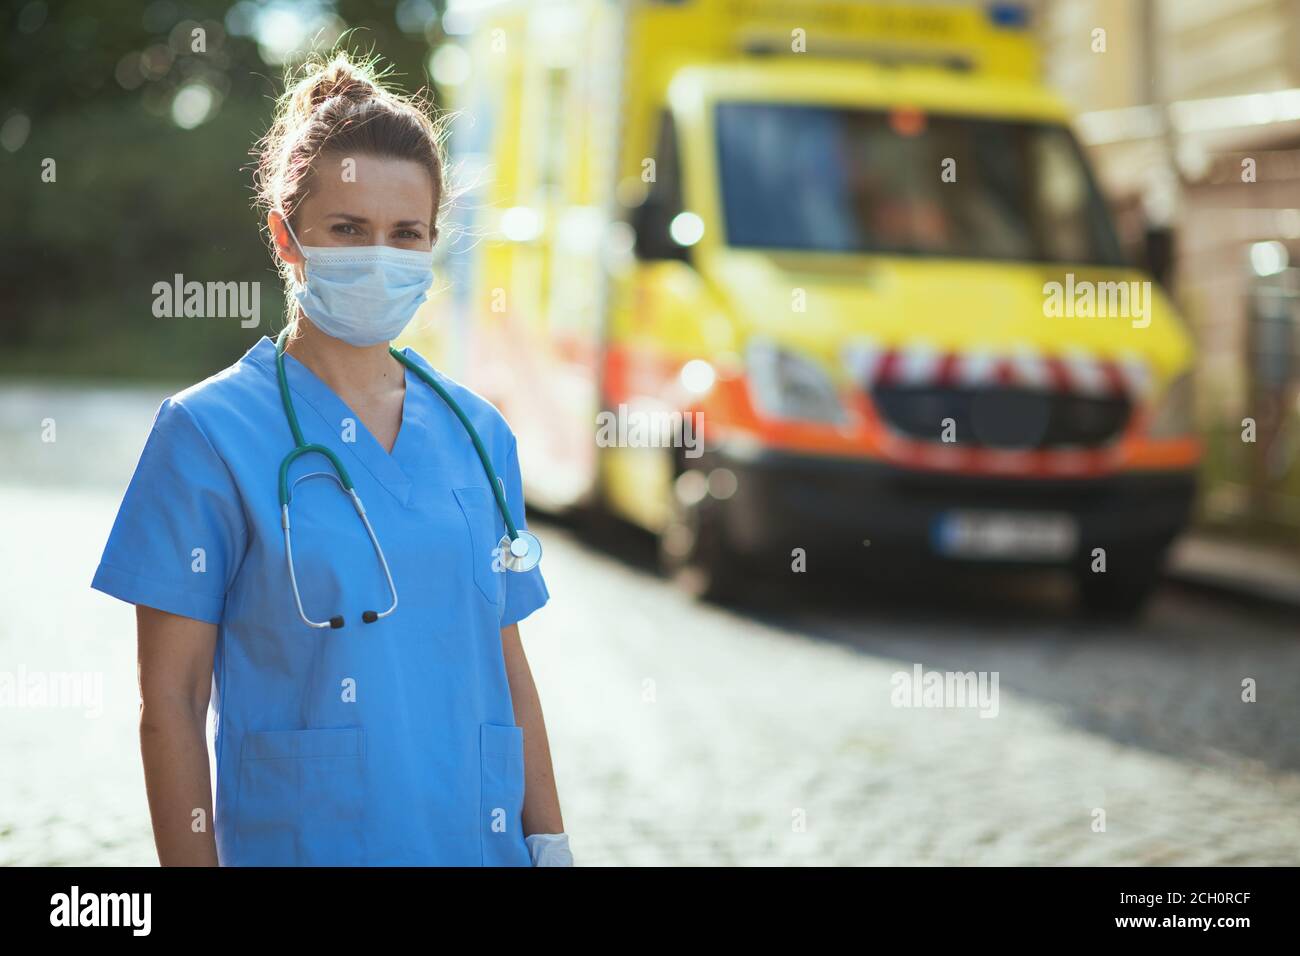 covid-19 pandemic. Portrait of modern paramedic woman in uniform with stethoscope and medical mask outside near ambulance. Stock Photo